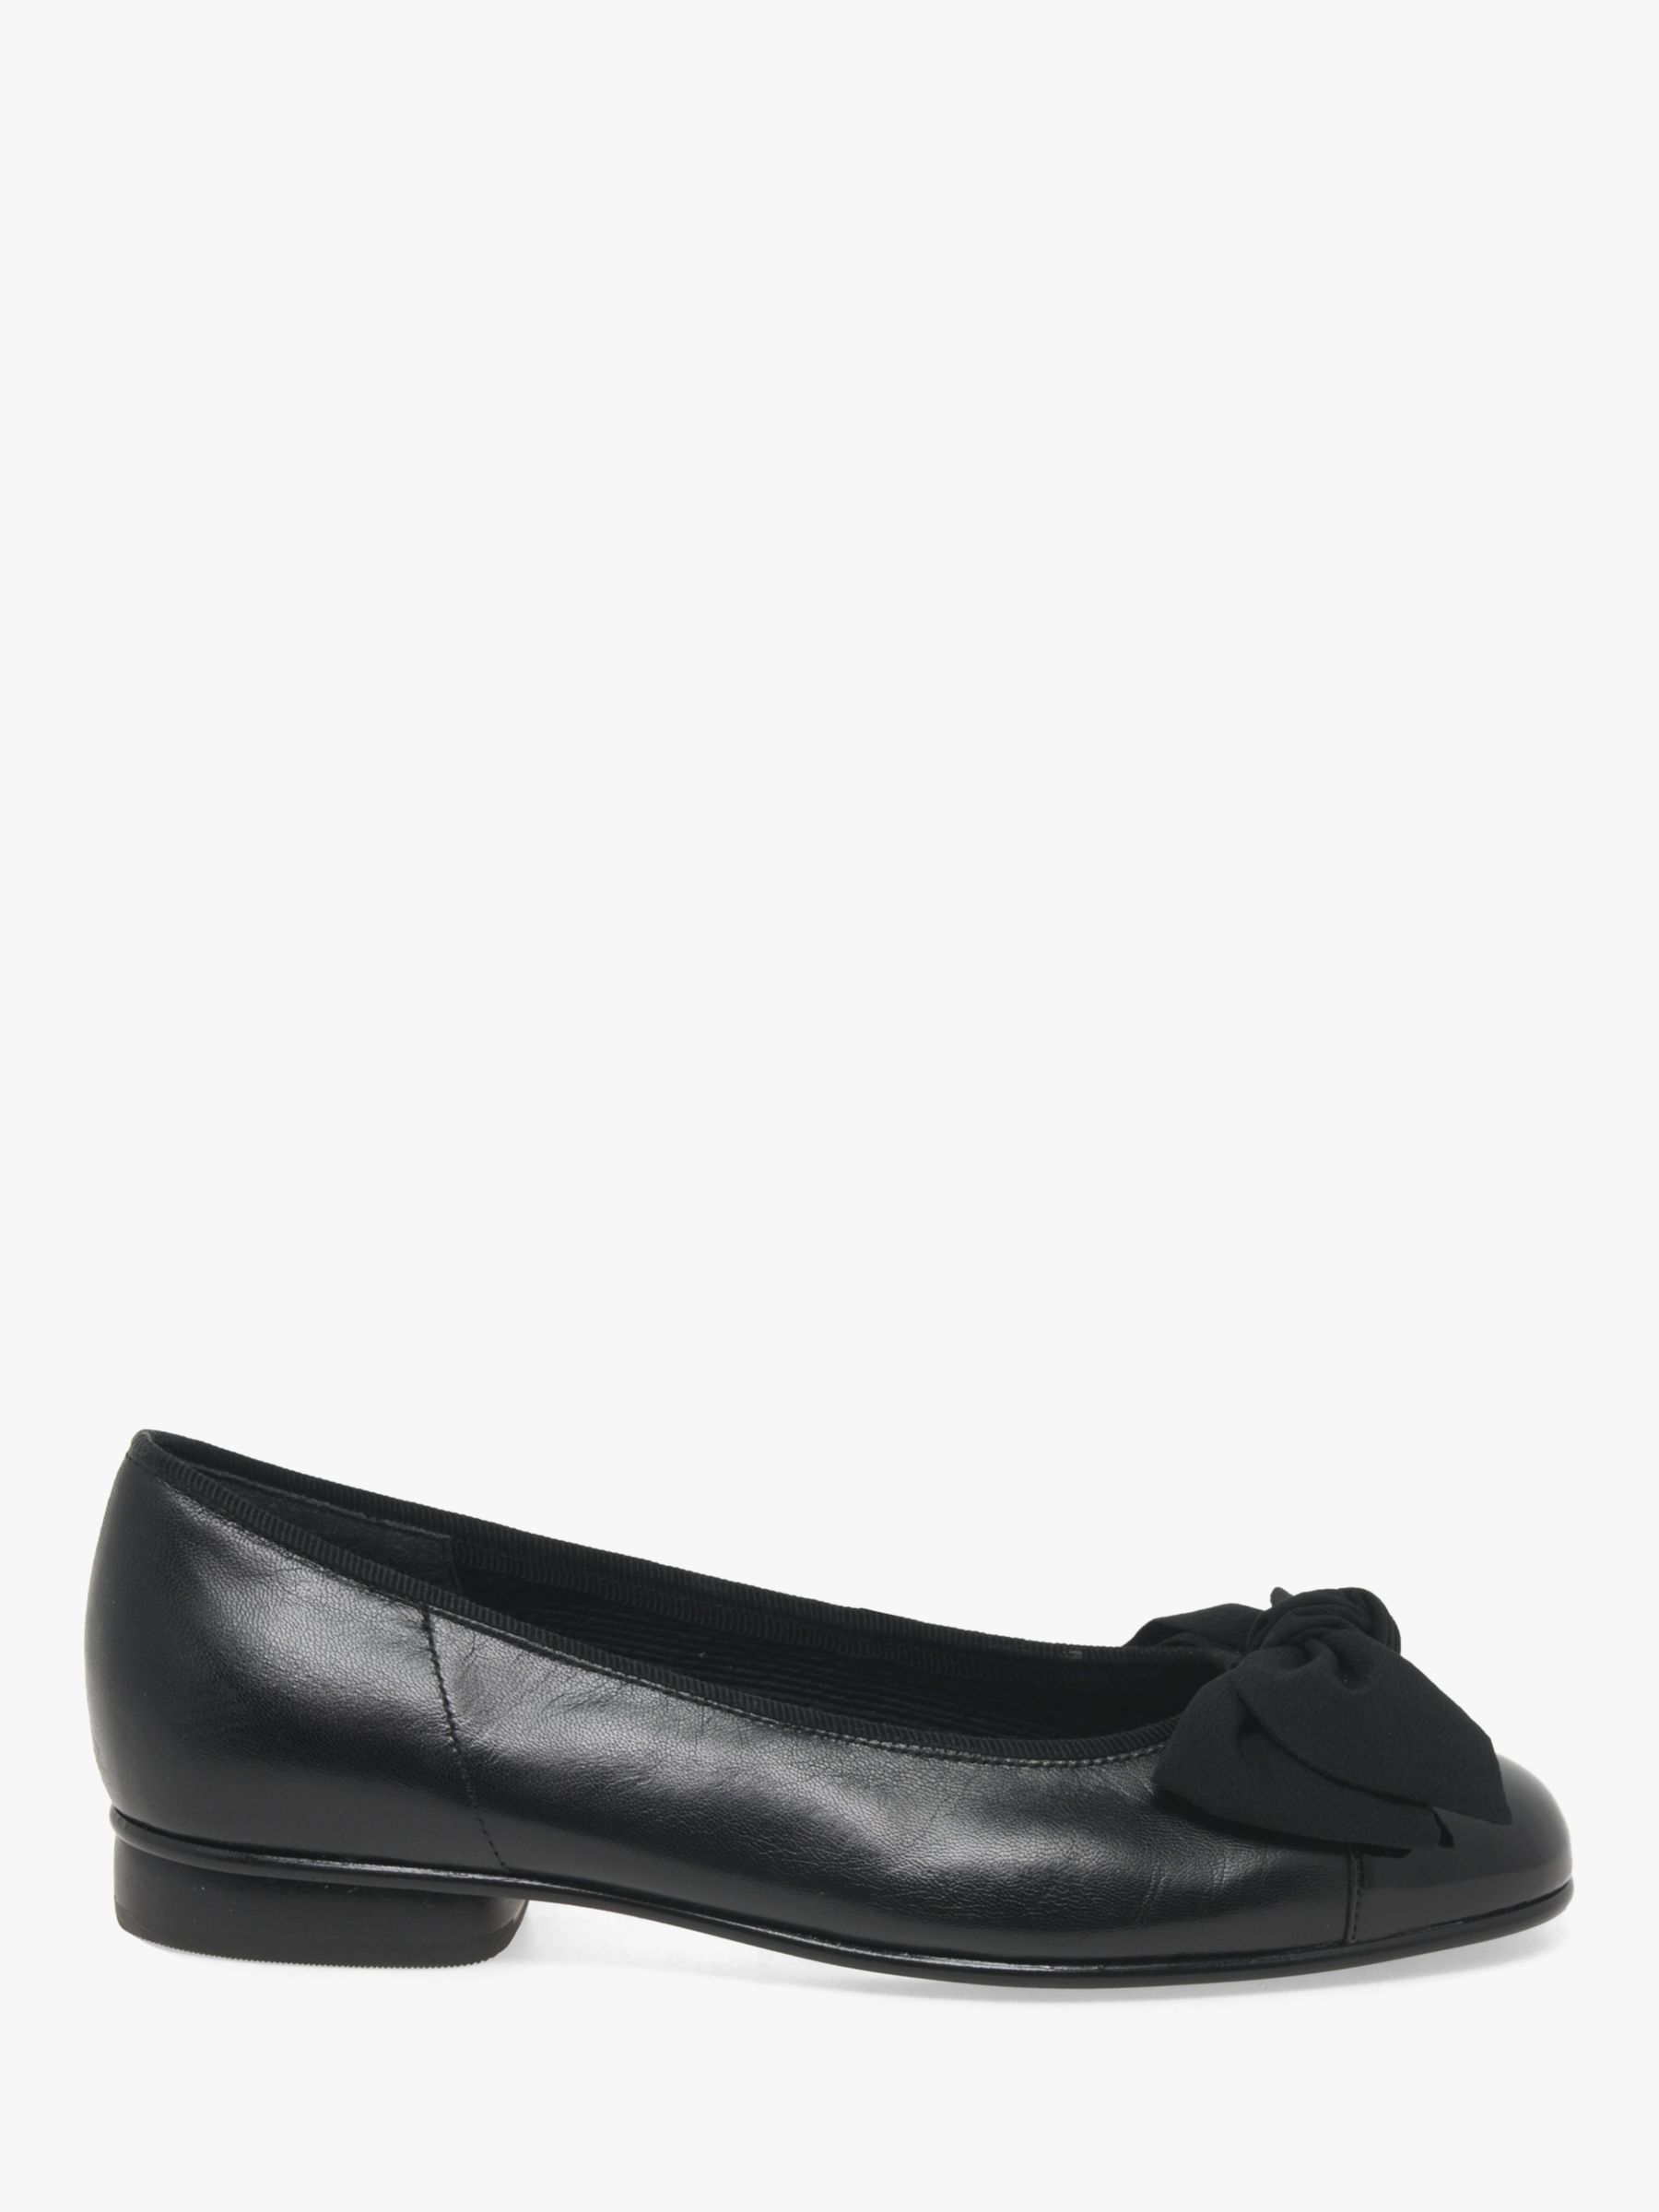 Gabor Amy Leather Ballet Pumps, at John Lewis Partners